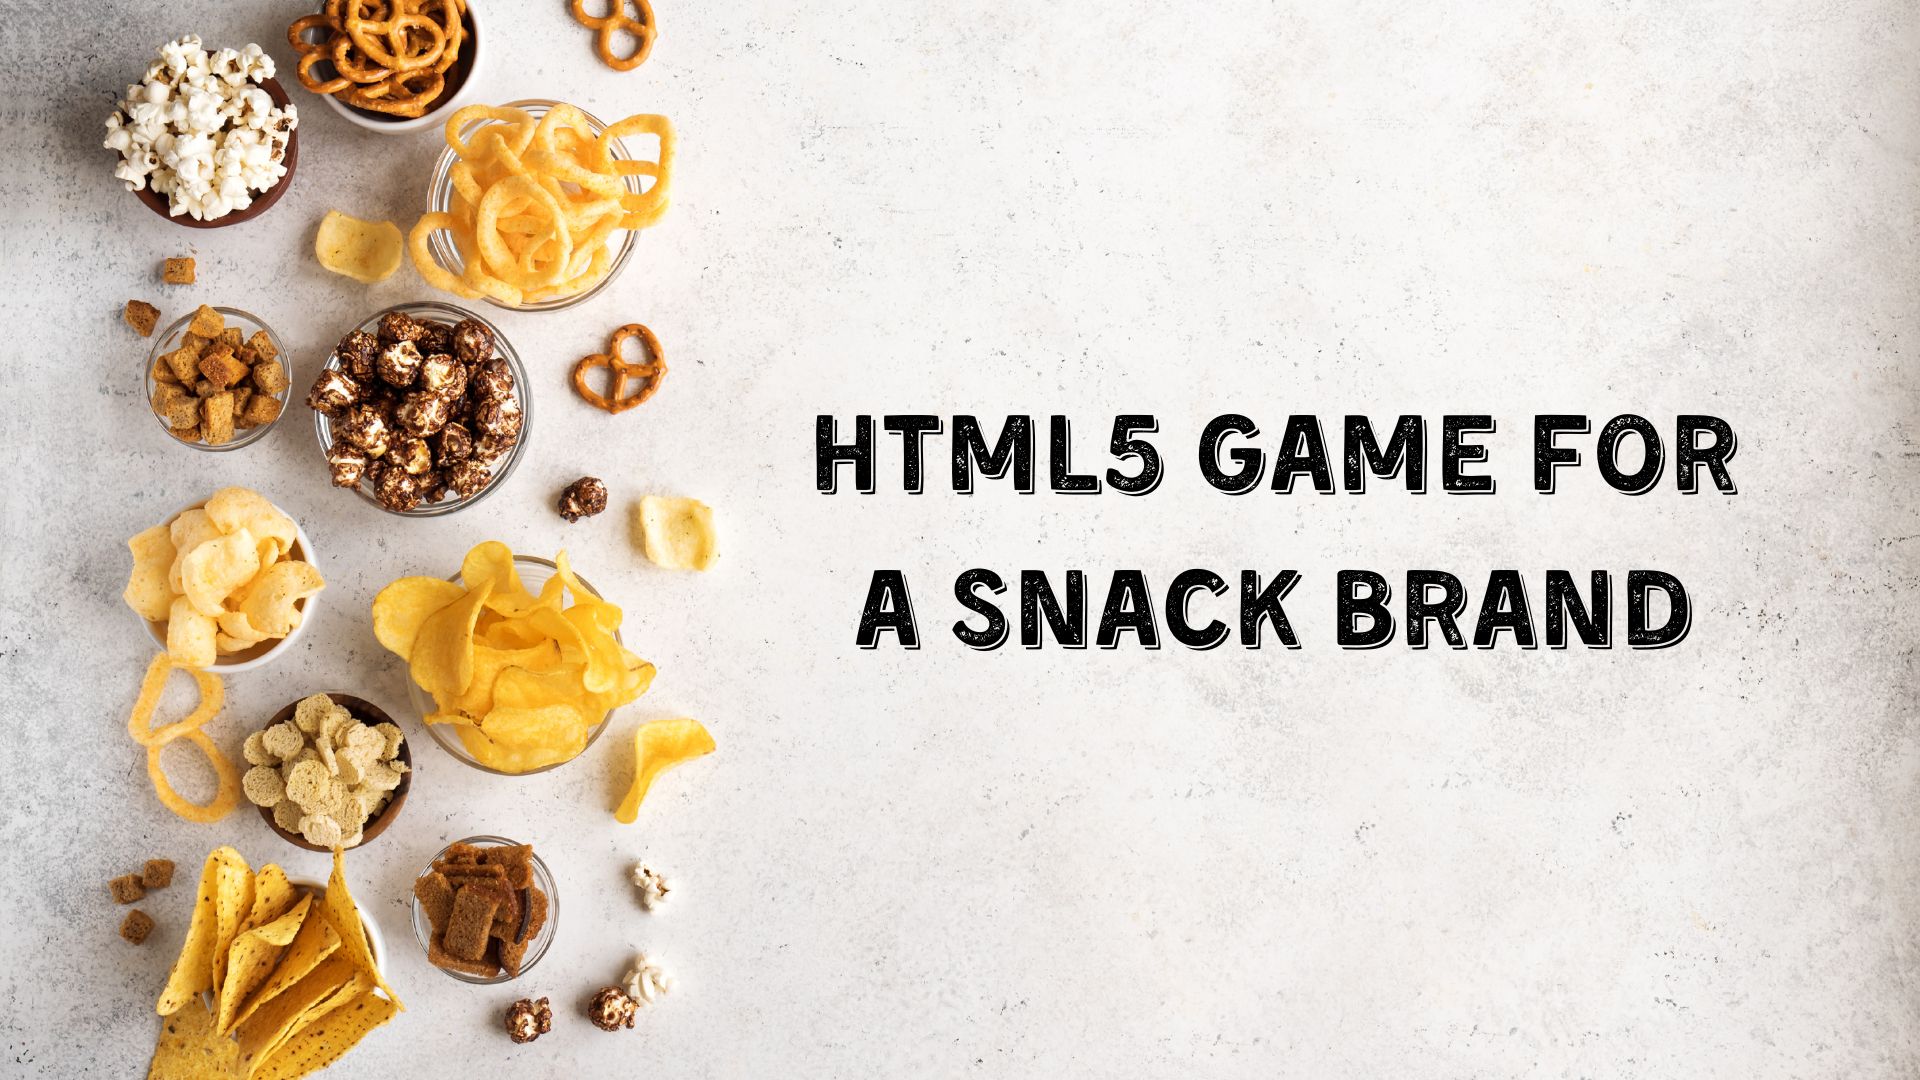 HTML5 Game For A Snack Brand